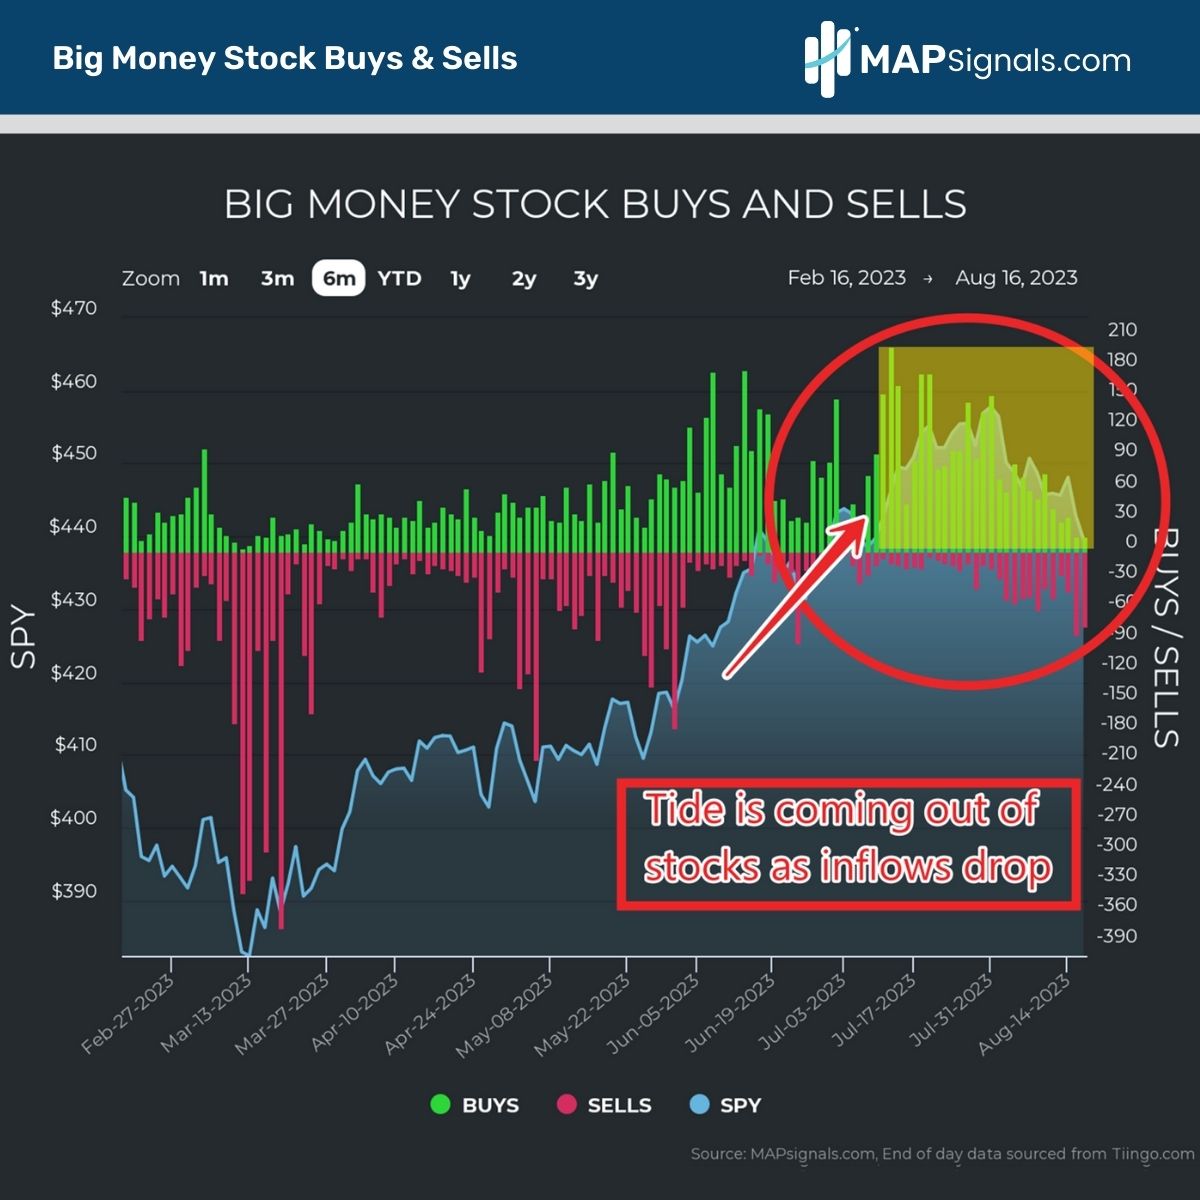 Tide leaving stocks as inflows drop | Big Money Stock Buys & Sells | MAPsignals